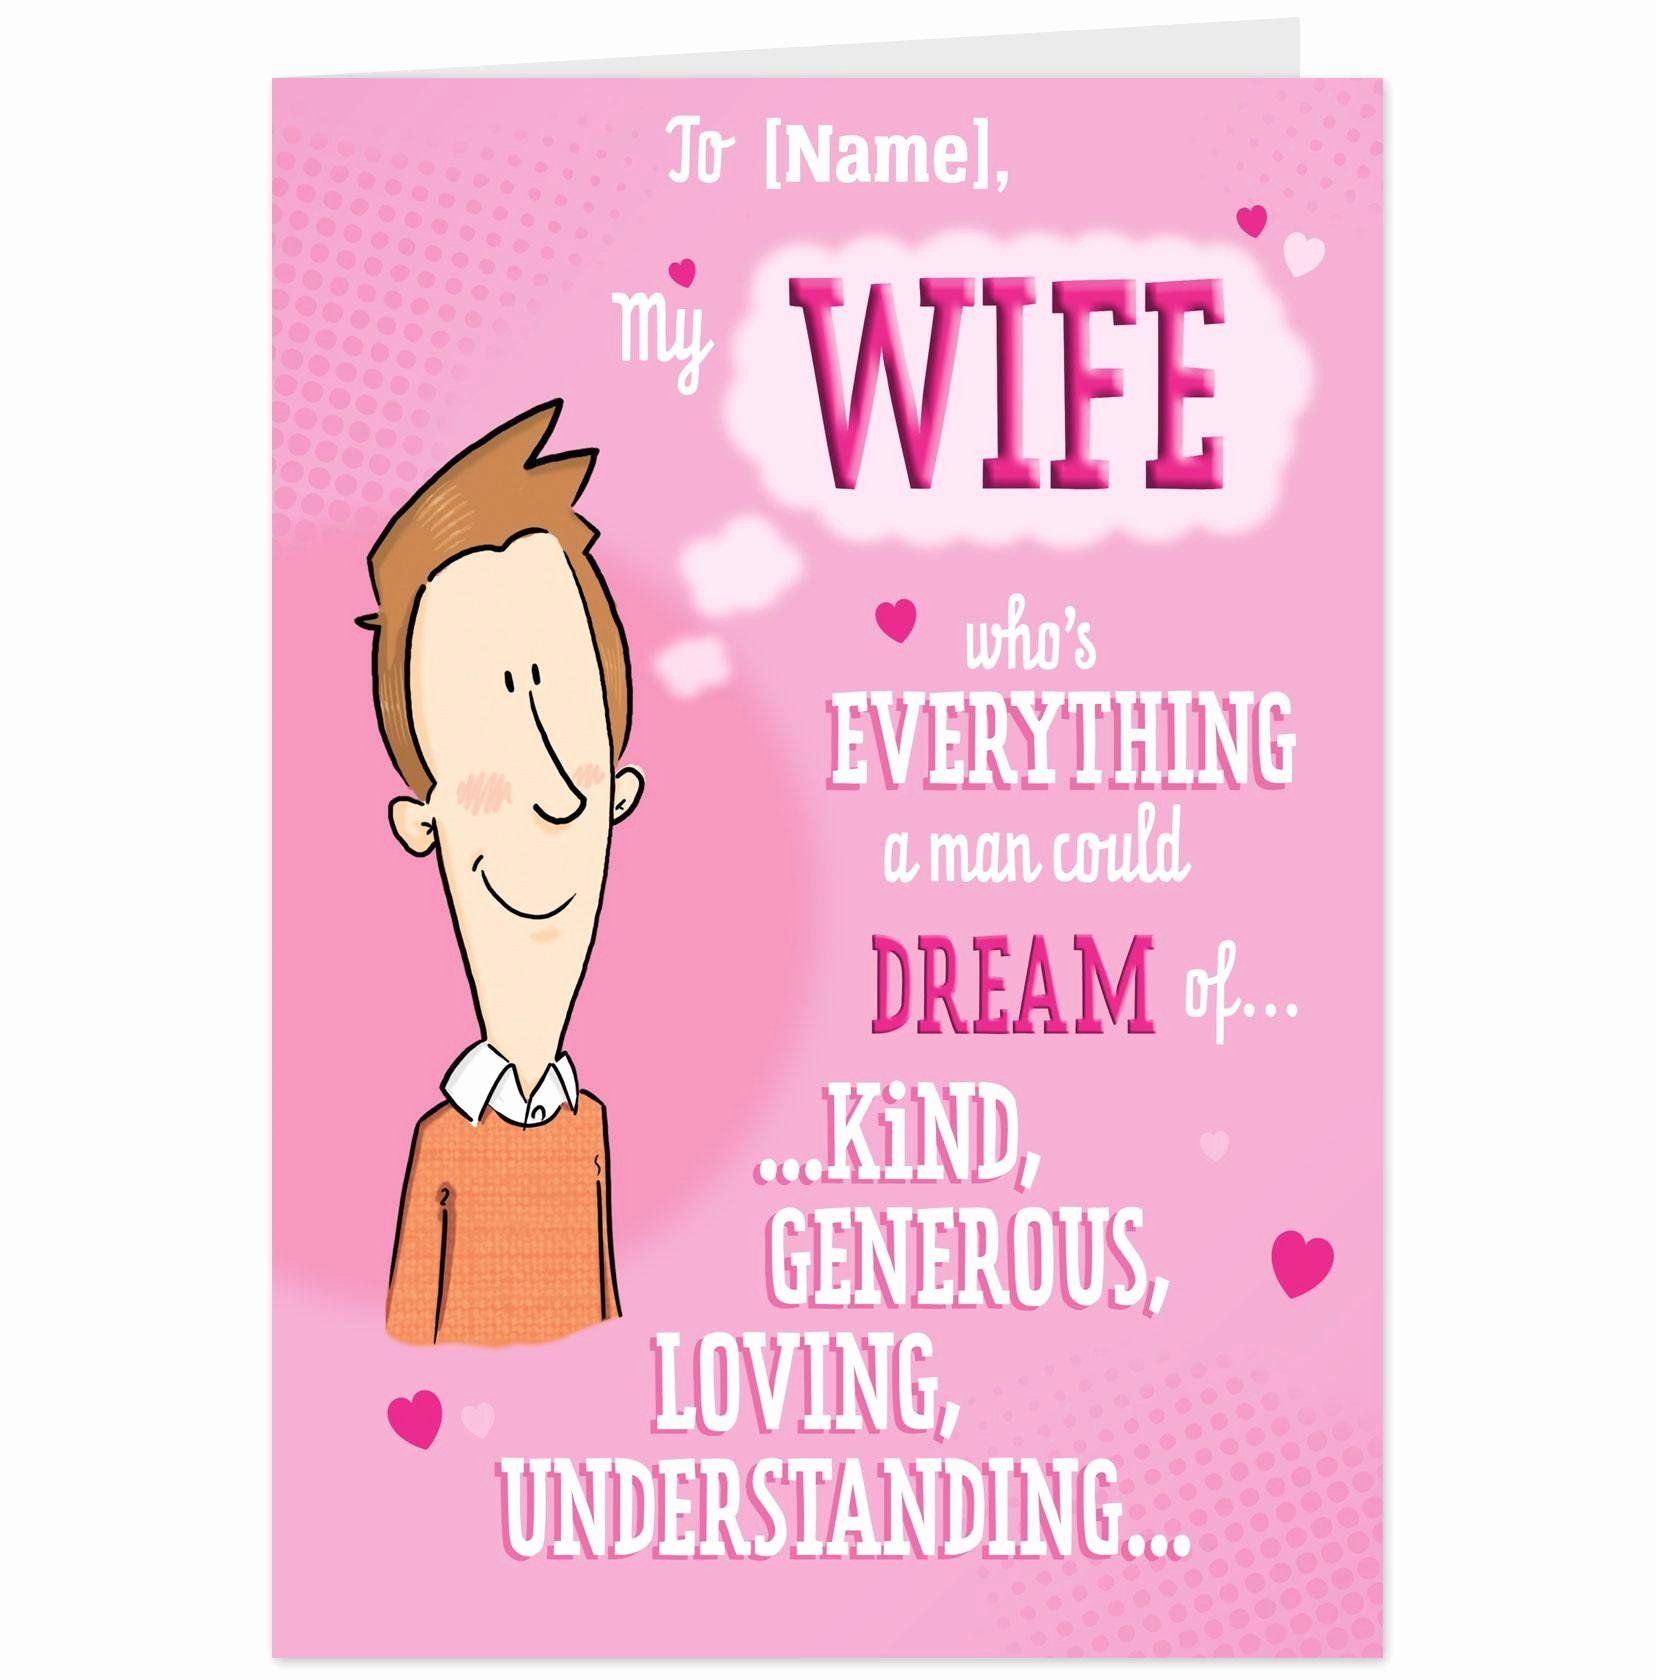 Free Romantic Ecards In 2020 Birthday Cards For Girlfriend Happy